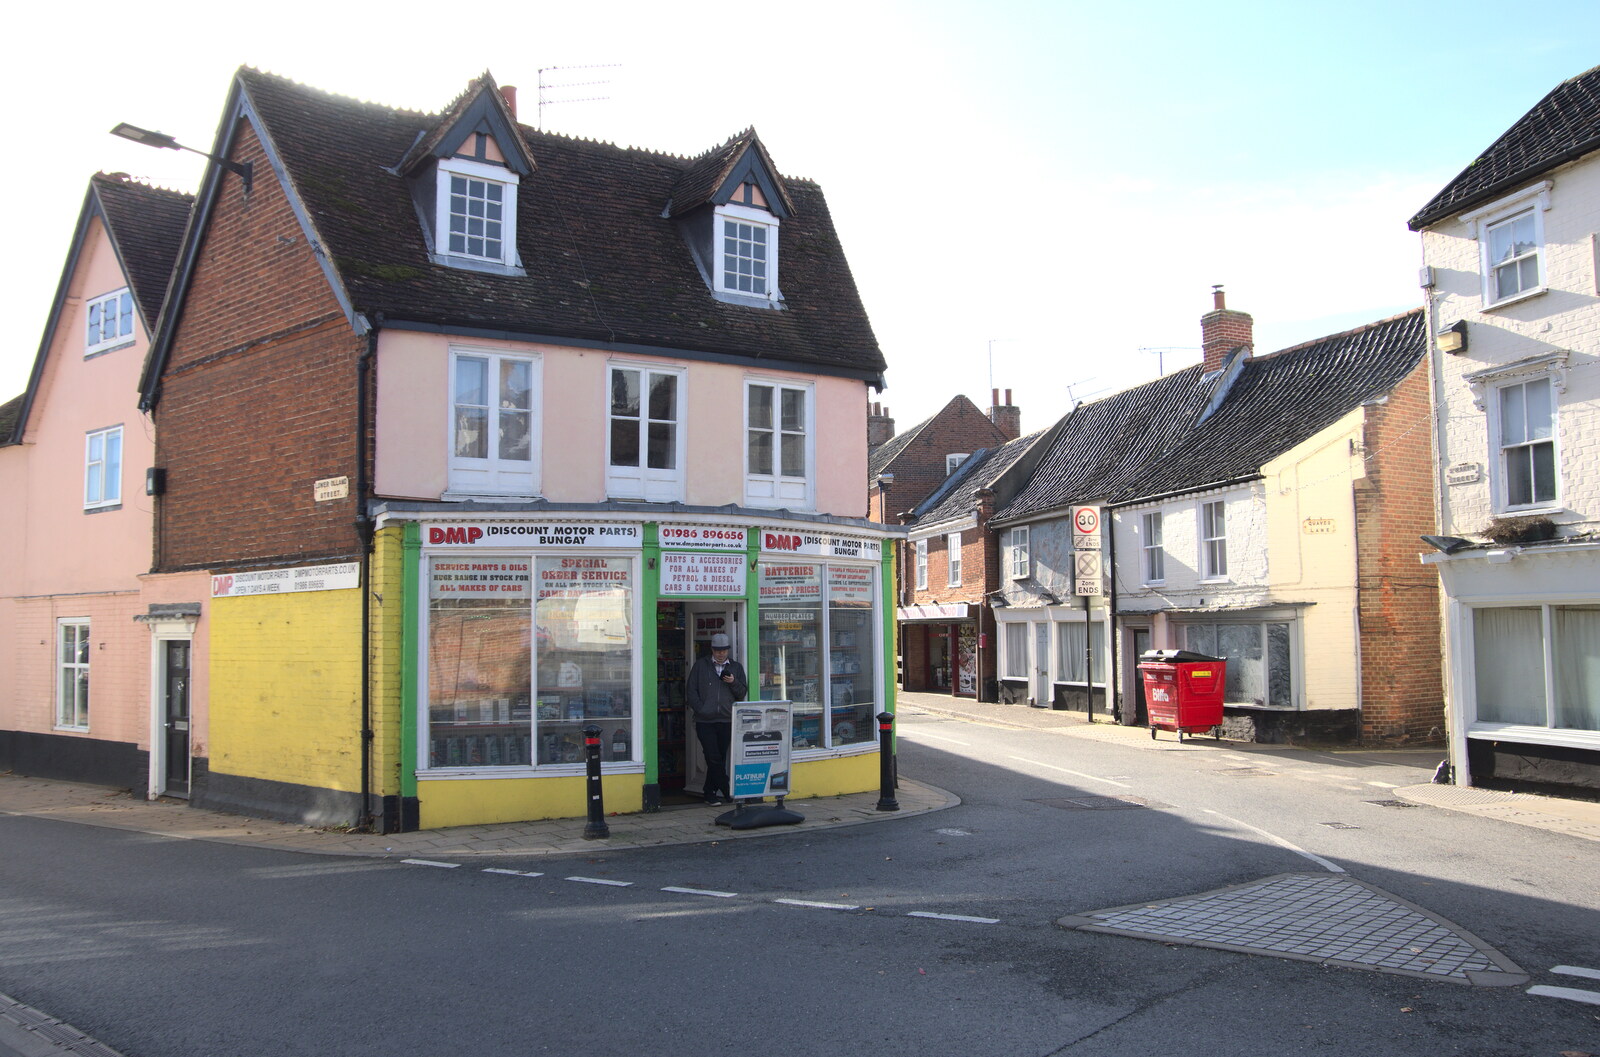 A Postcard from Bungay, Suffolk - 2nd November 2022: A car-parts shop on Olland Street